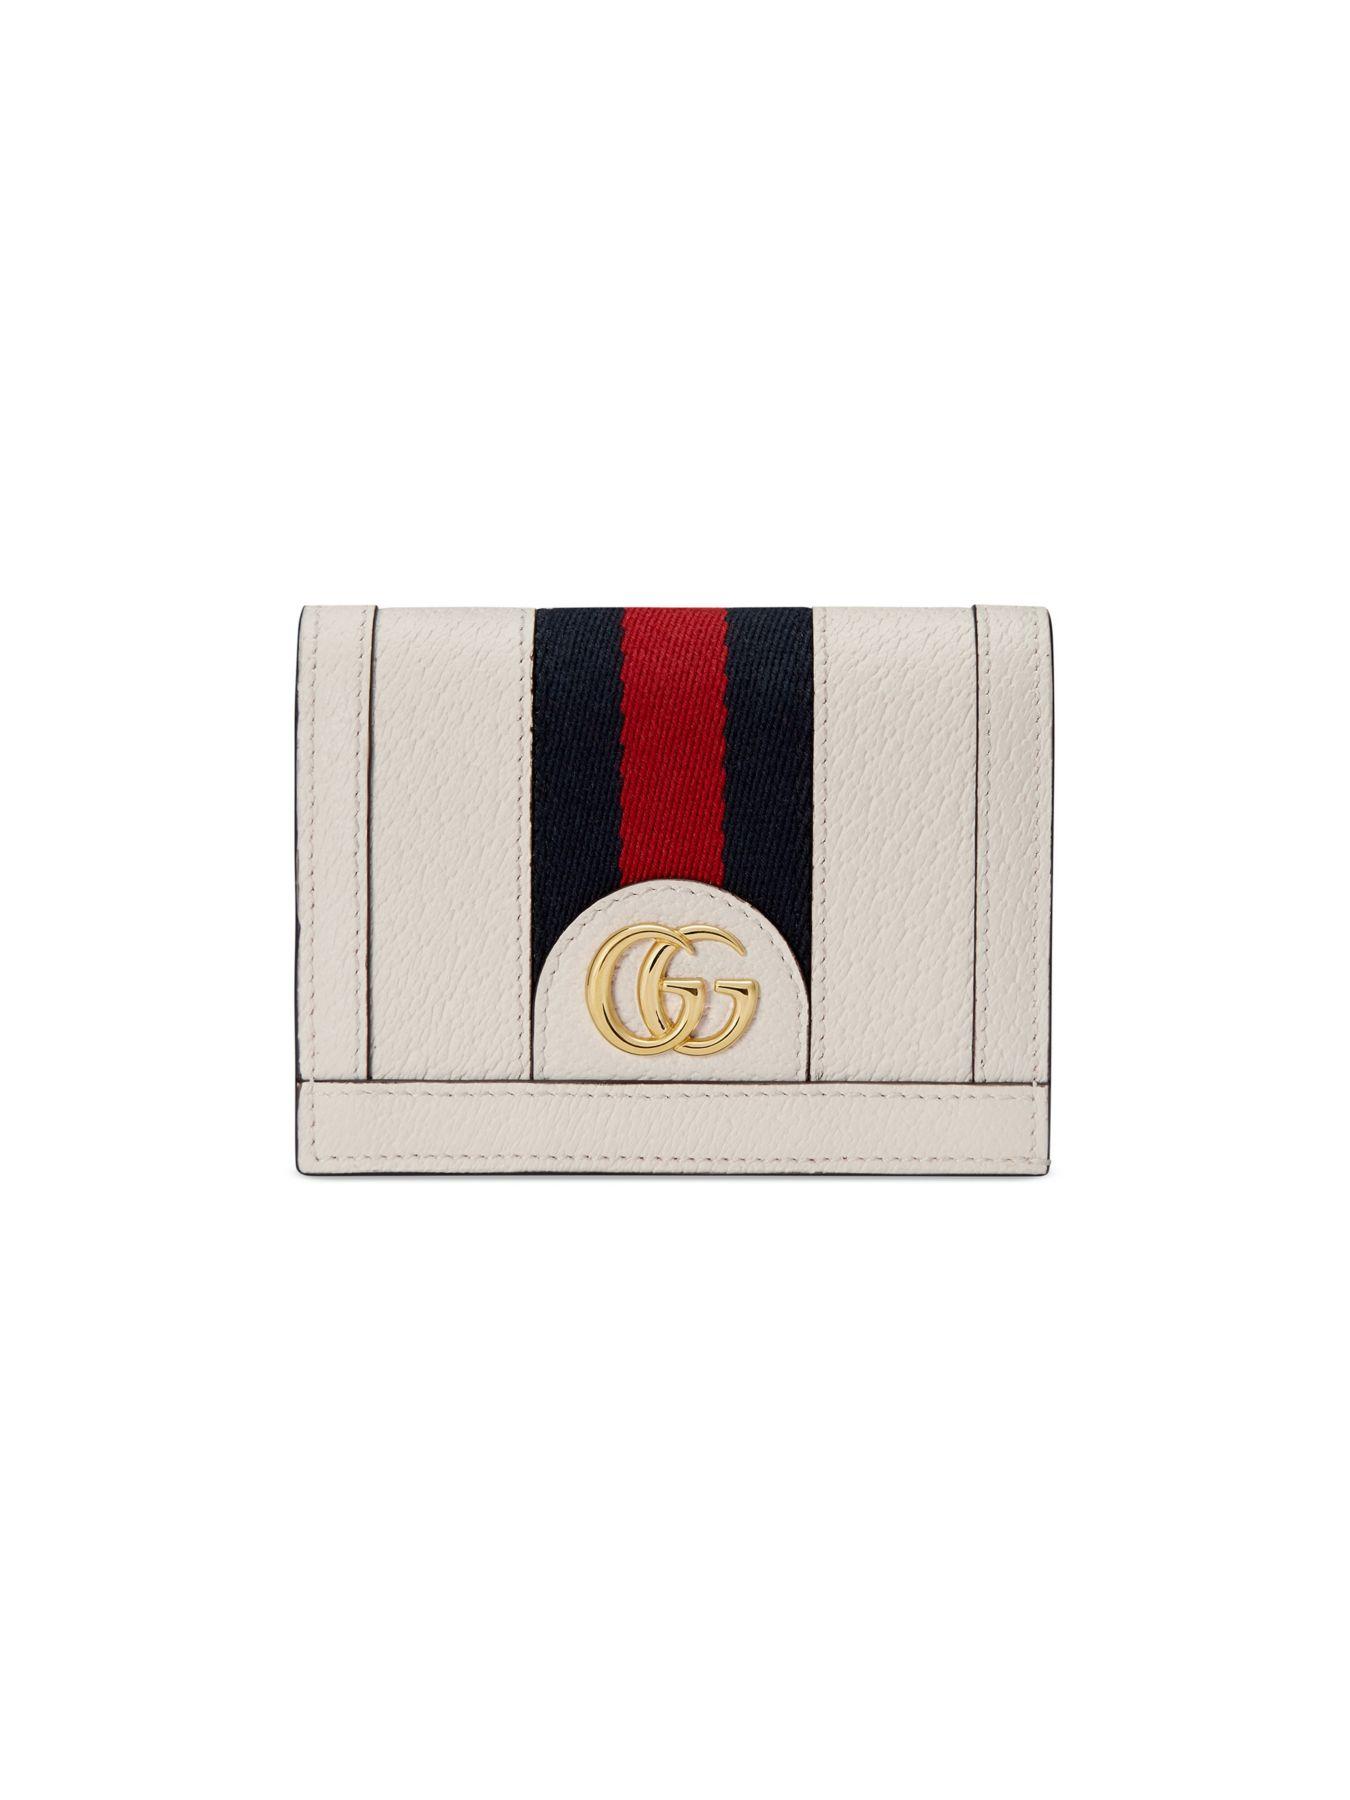 Gucci Leather Ophidia Card Case Wallet in White - Lyst